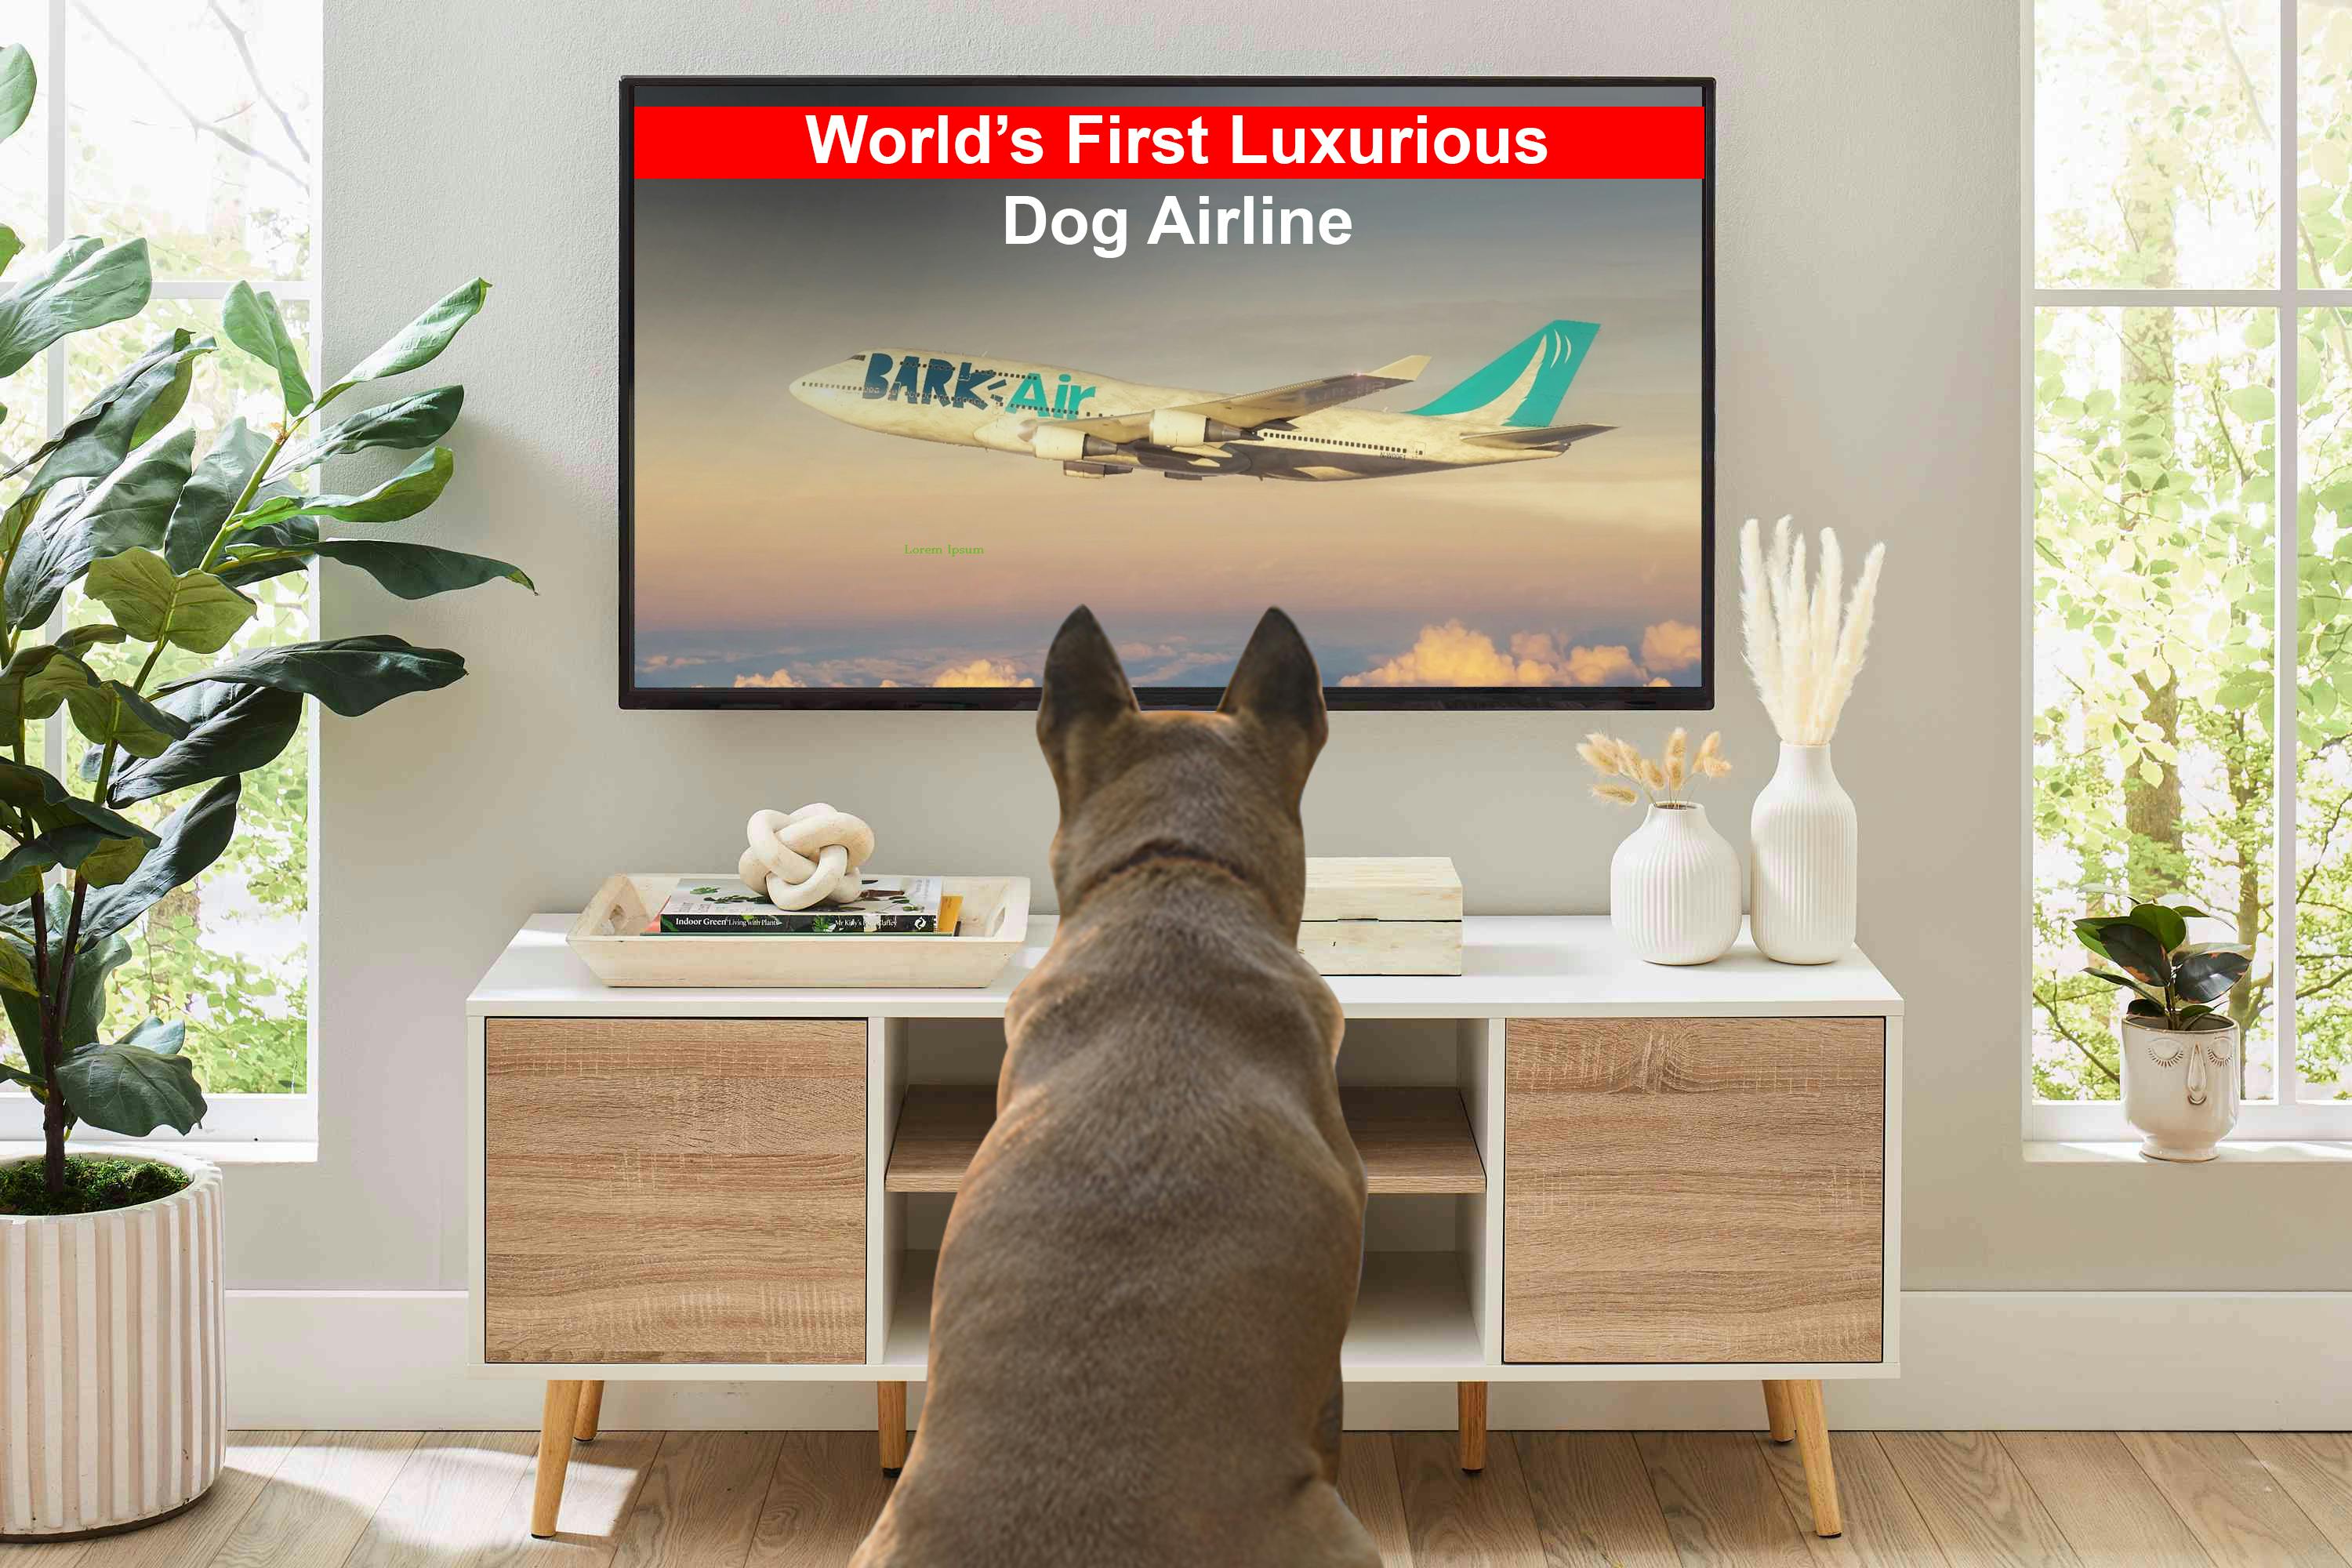 Everything About The World’s First Luxurious Dog Airline